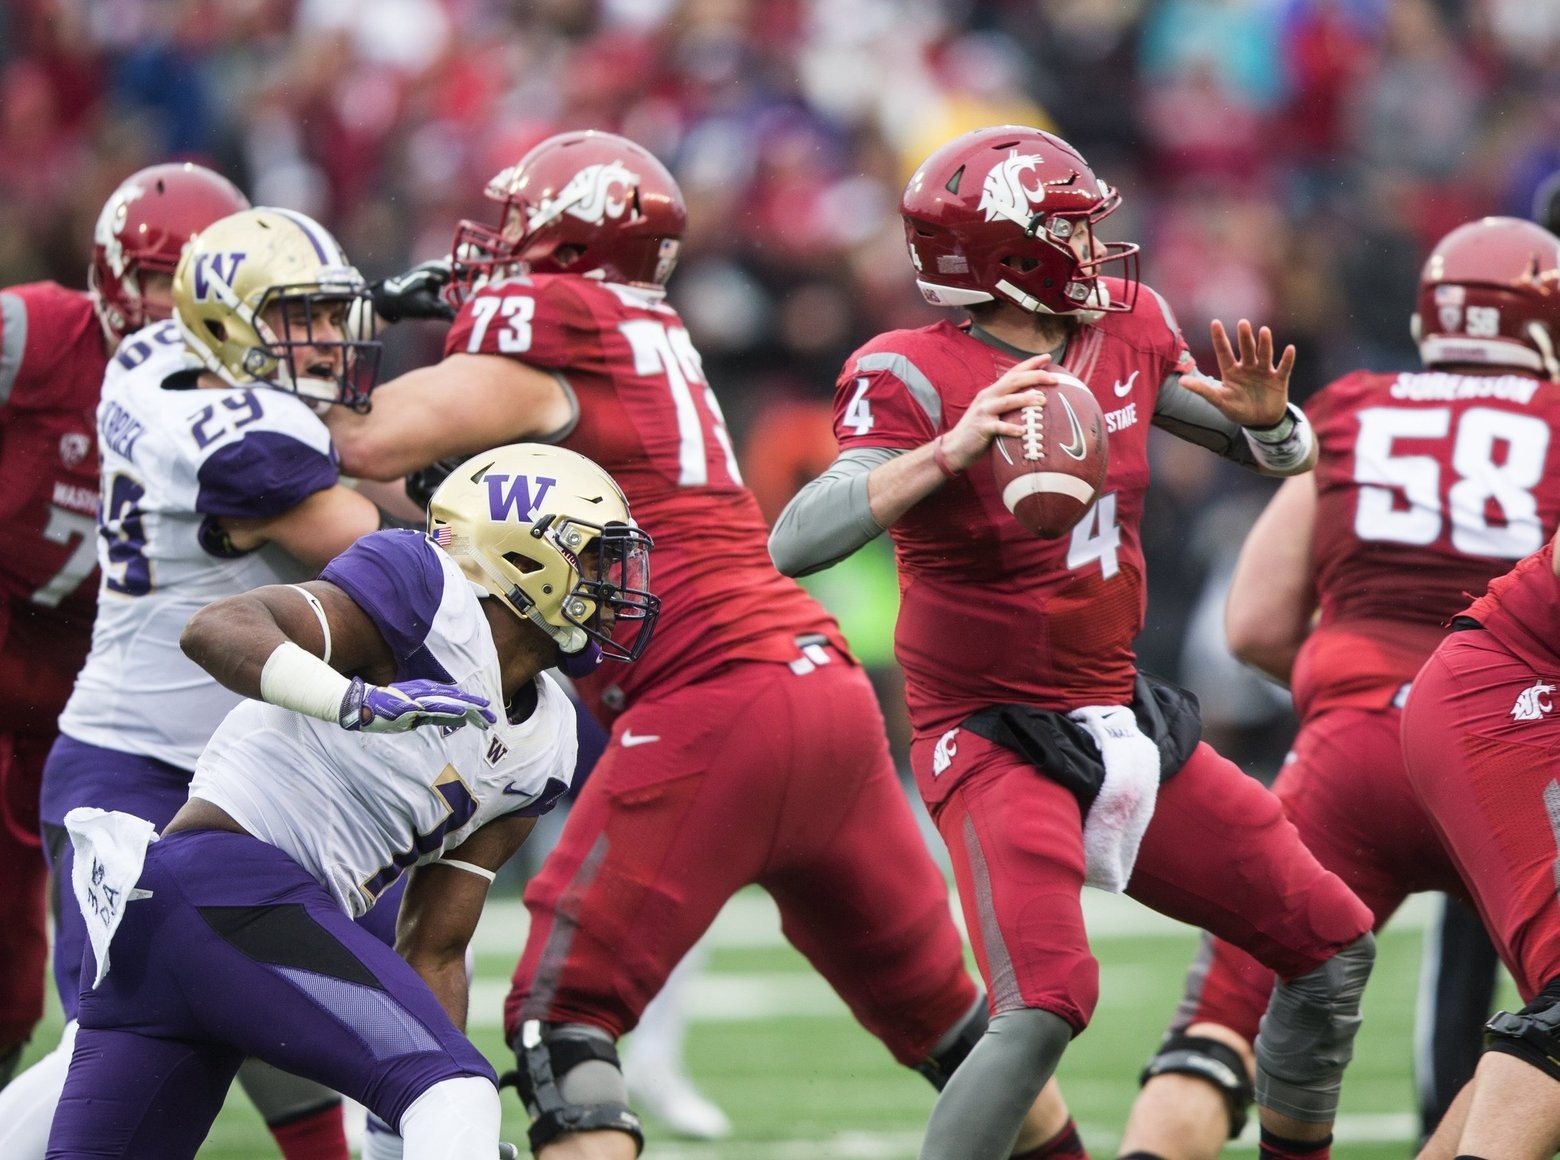 Apple Cup kickoff time to be announced this weekend